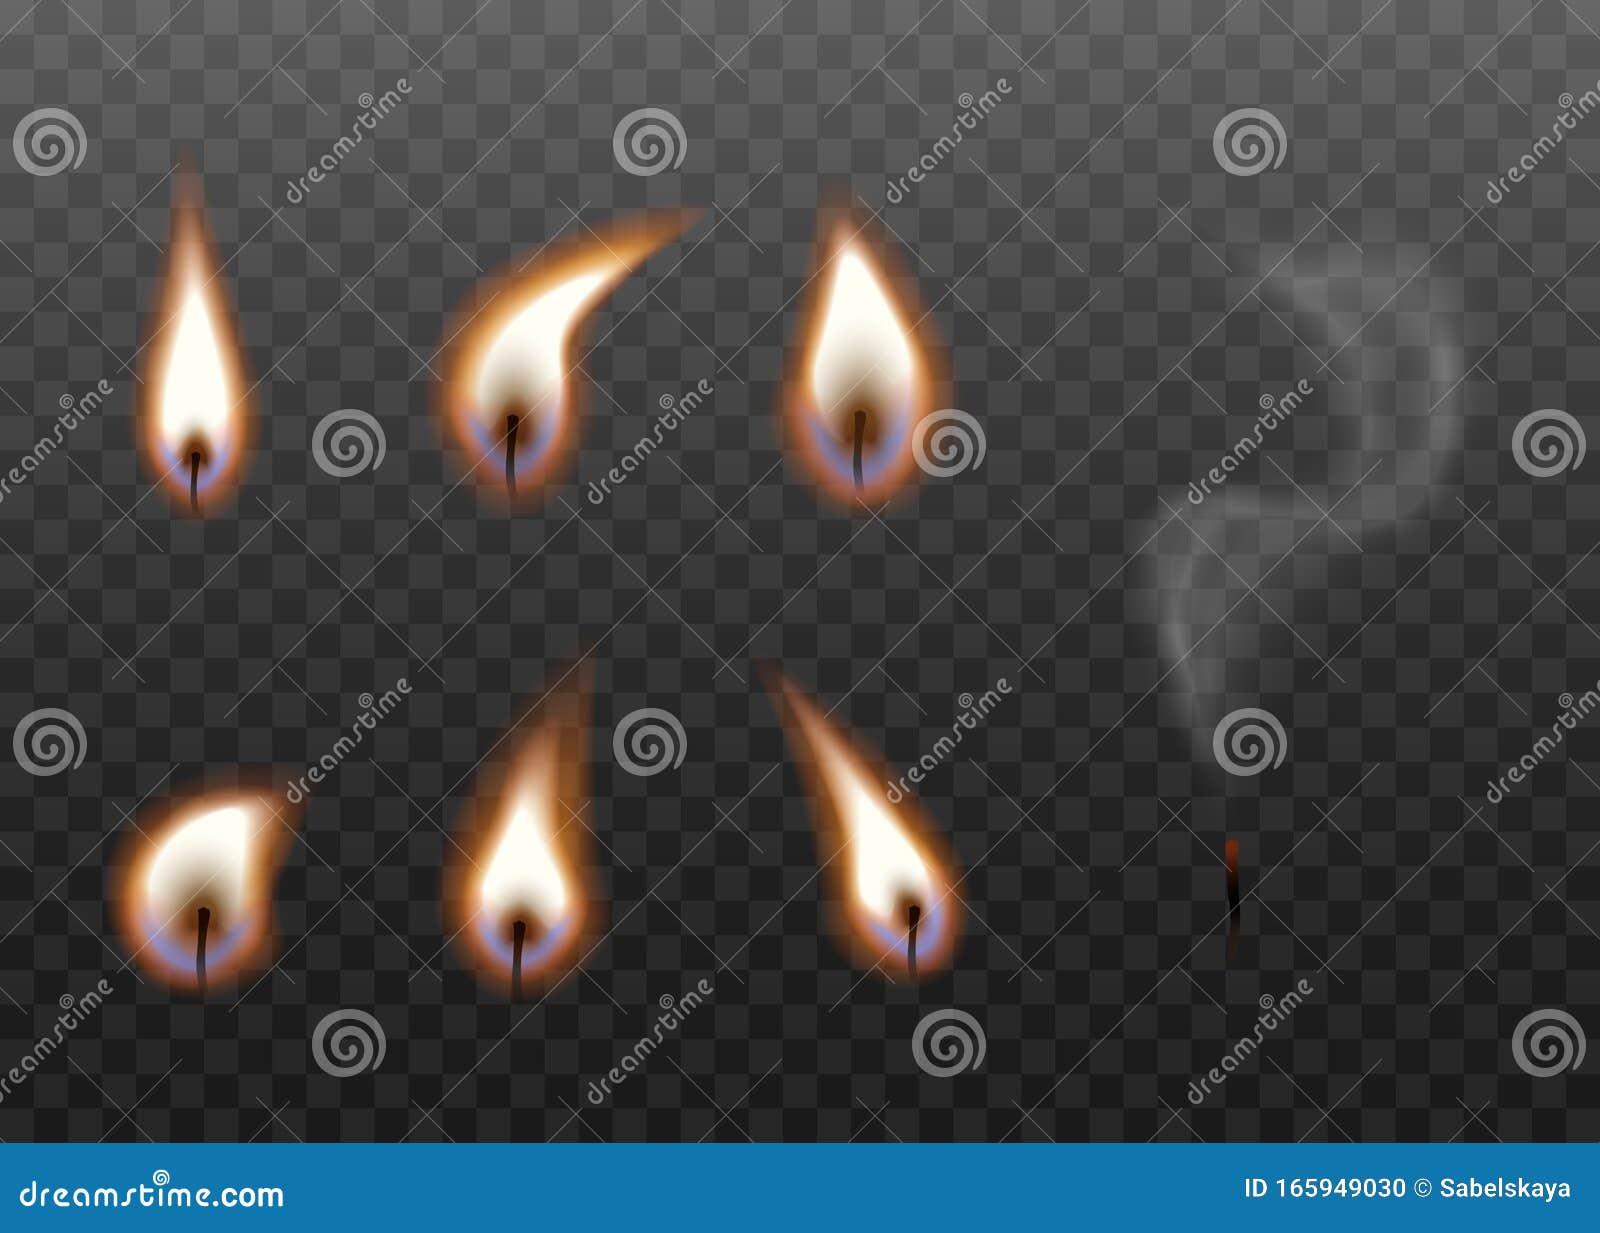 Burning candle wick isolated on transparent Vector Image